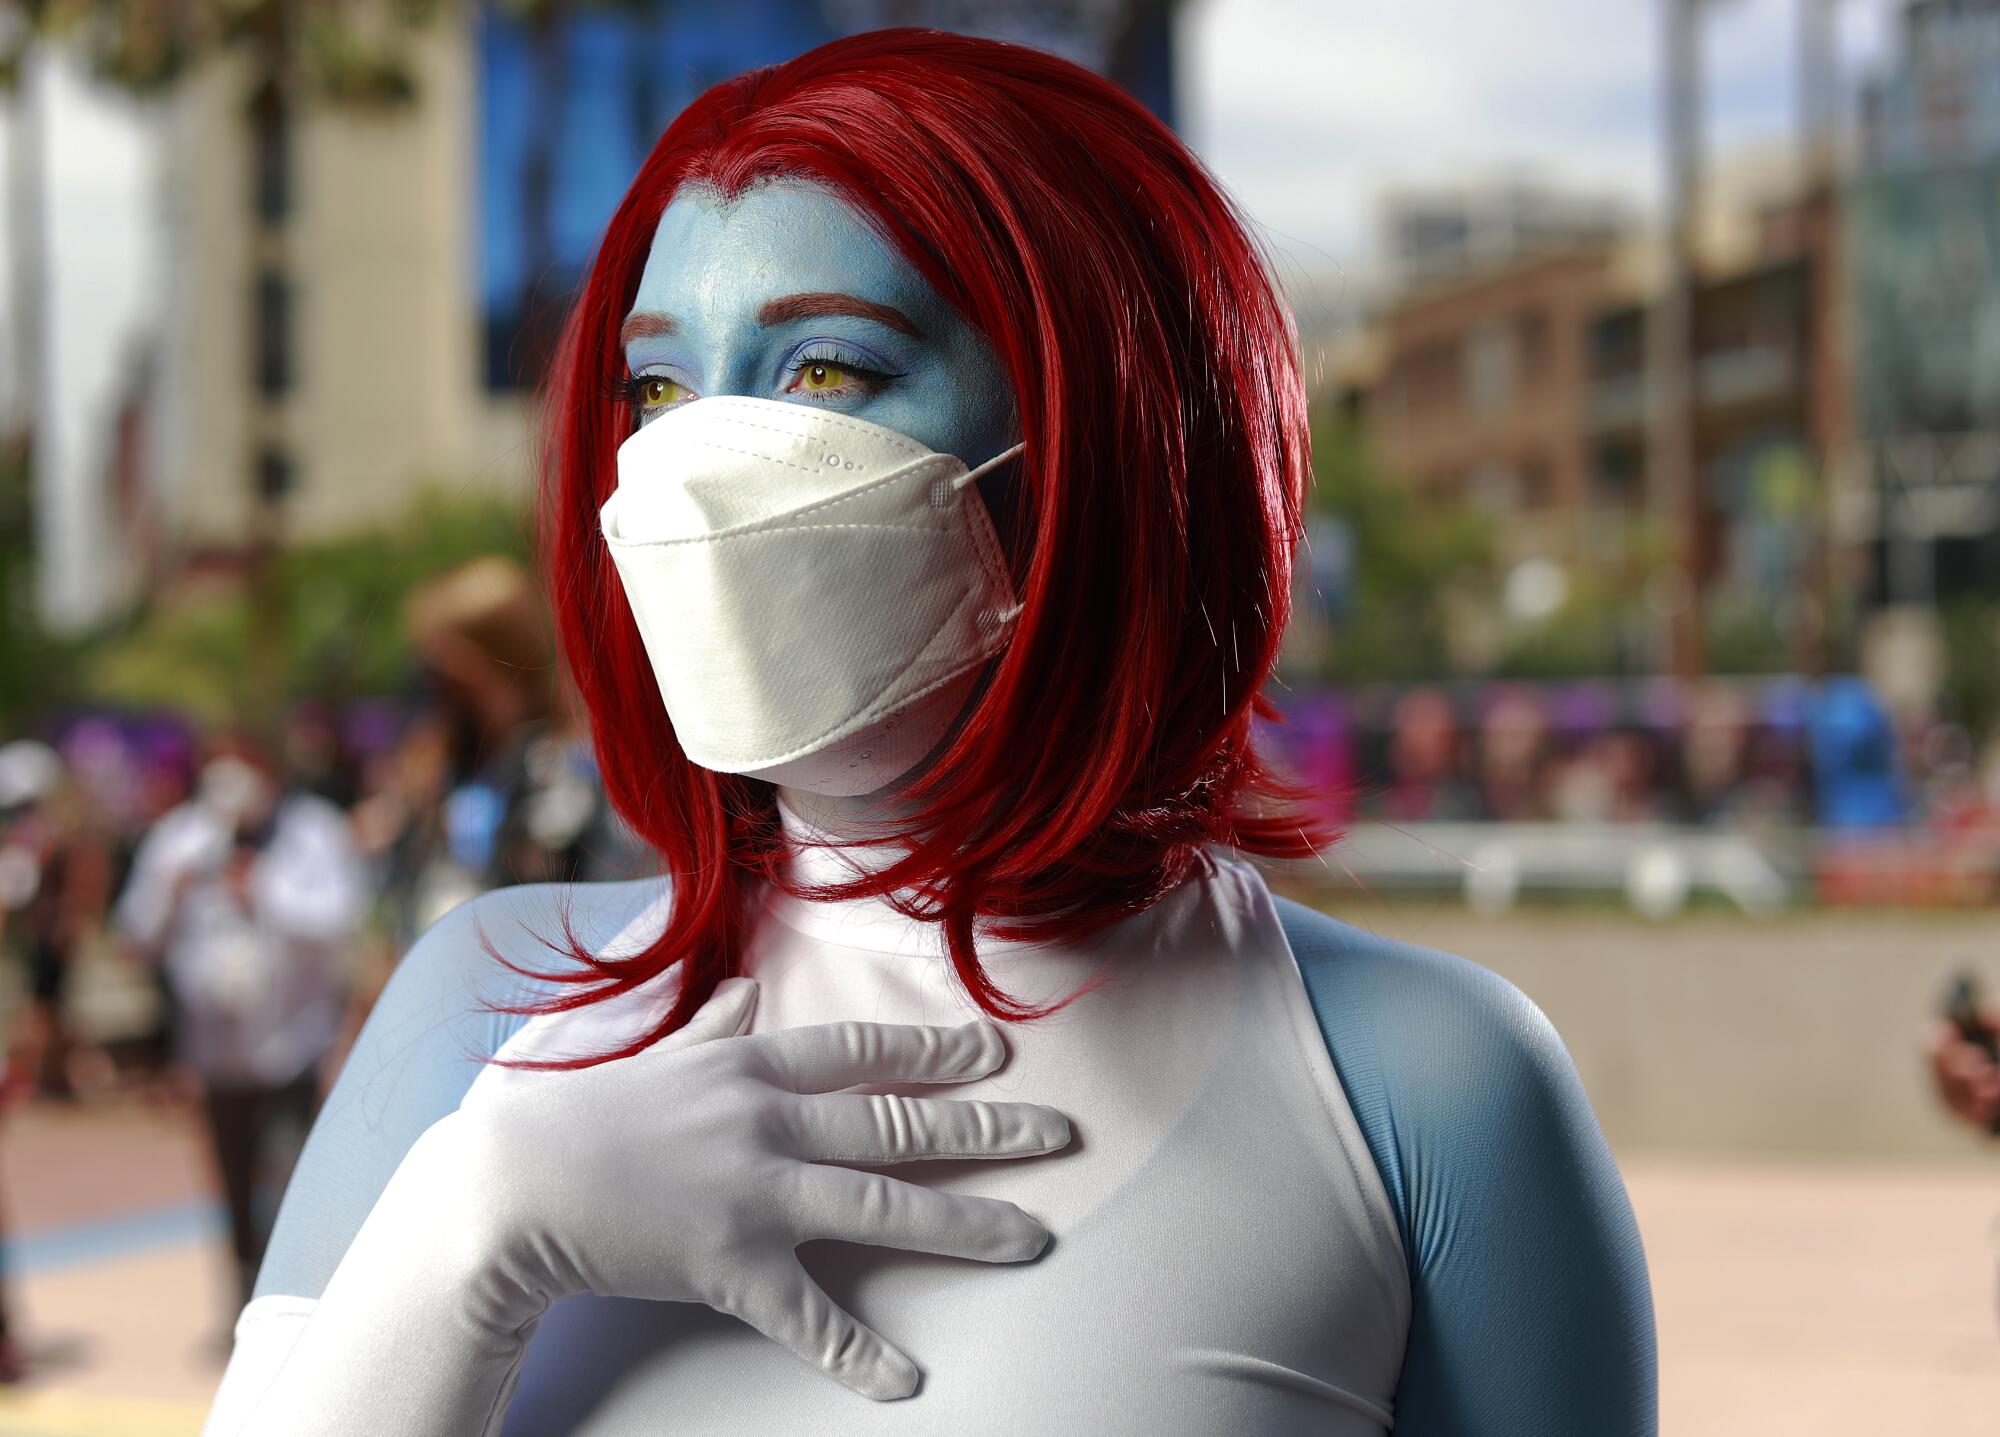 Maggie Drury of Tucson dressed as Mystique at Comic-Con in San Diego.